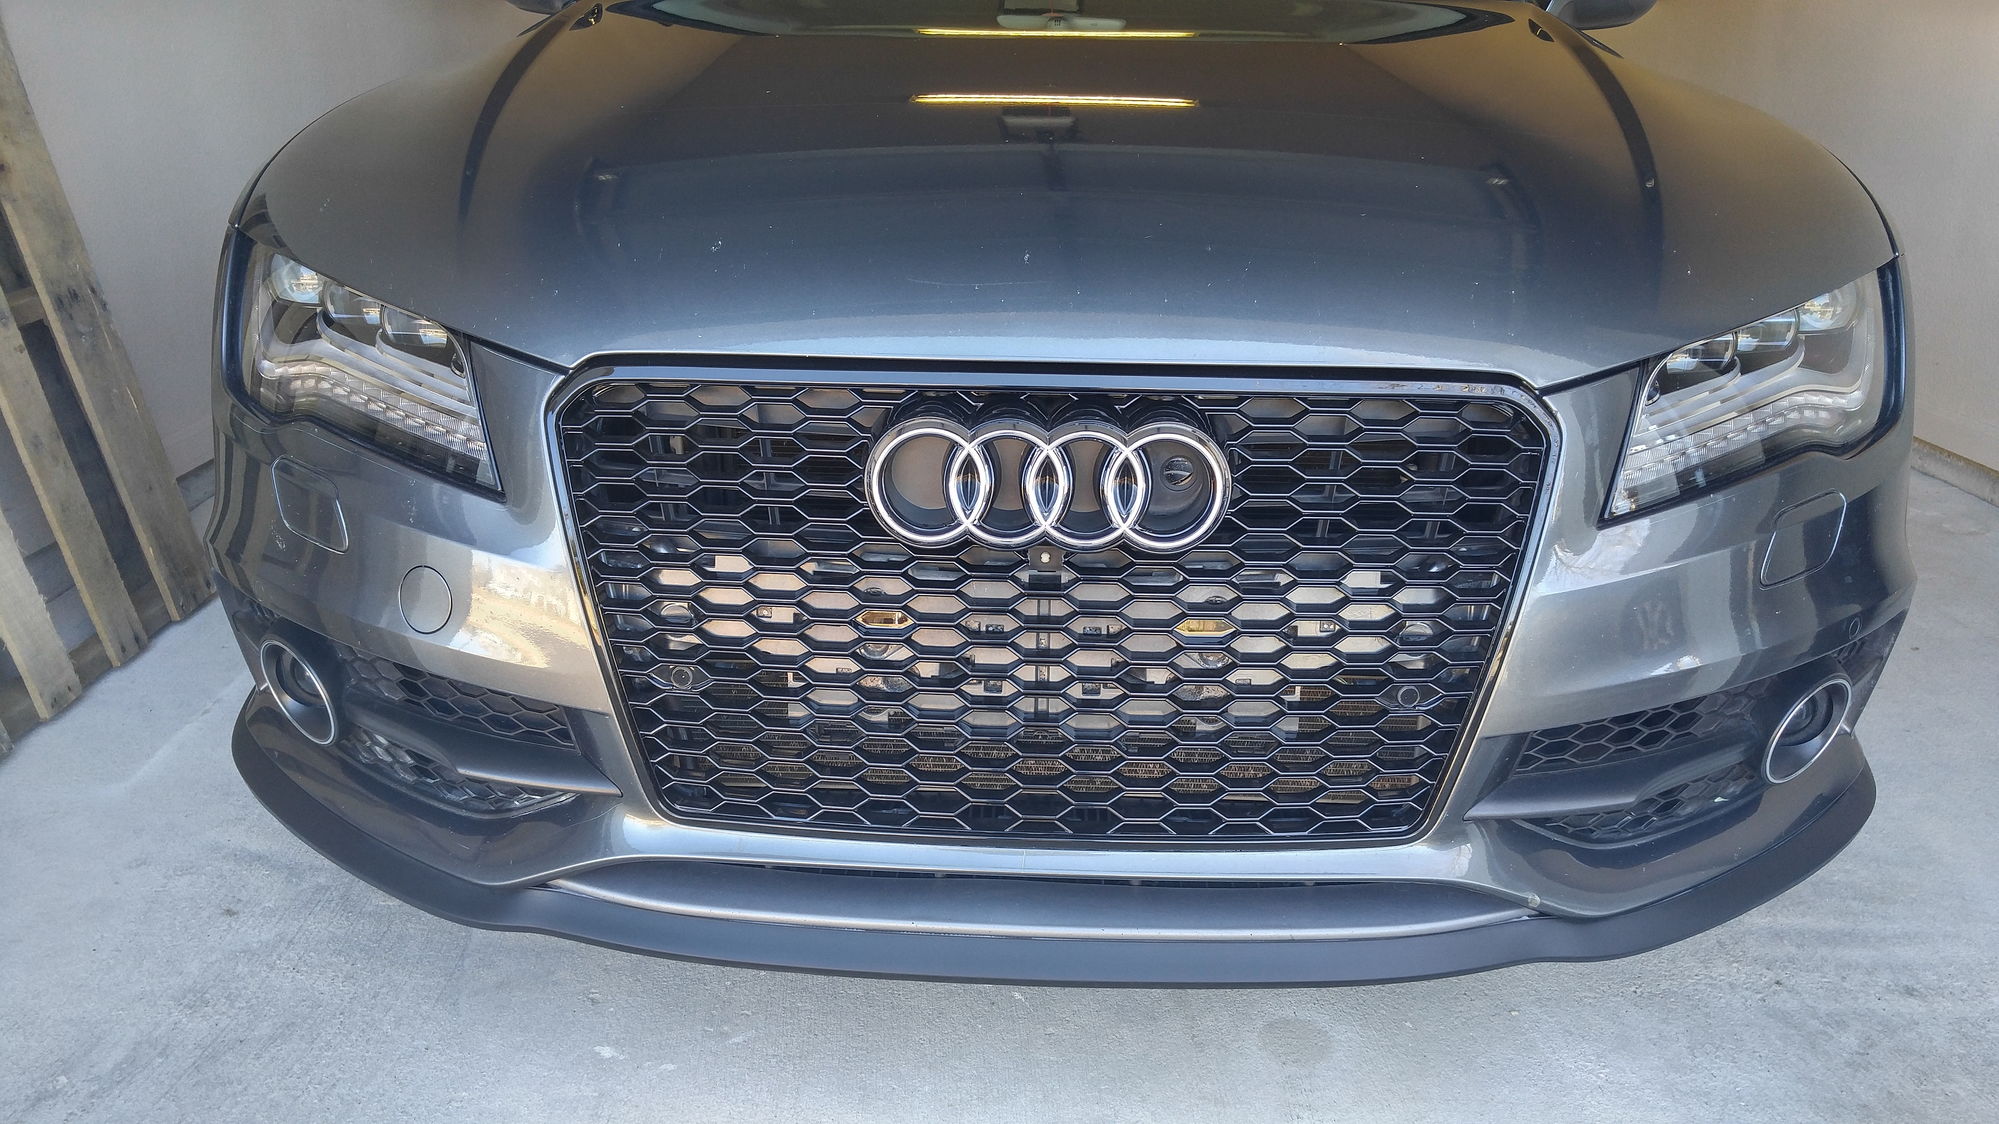 DIY RS7 grill install on A7 Prestige without bumper removal Page 4